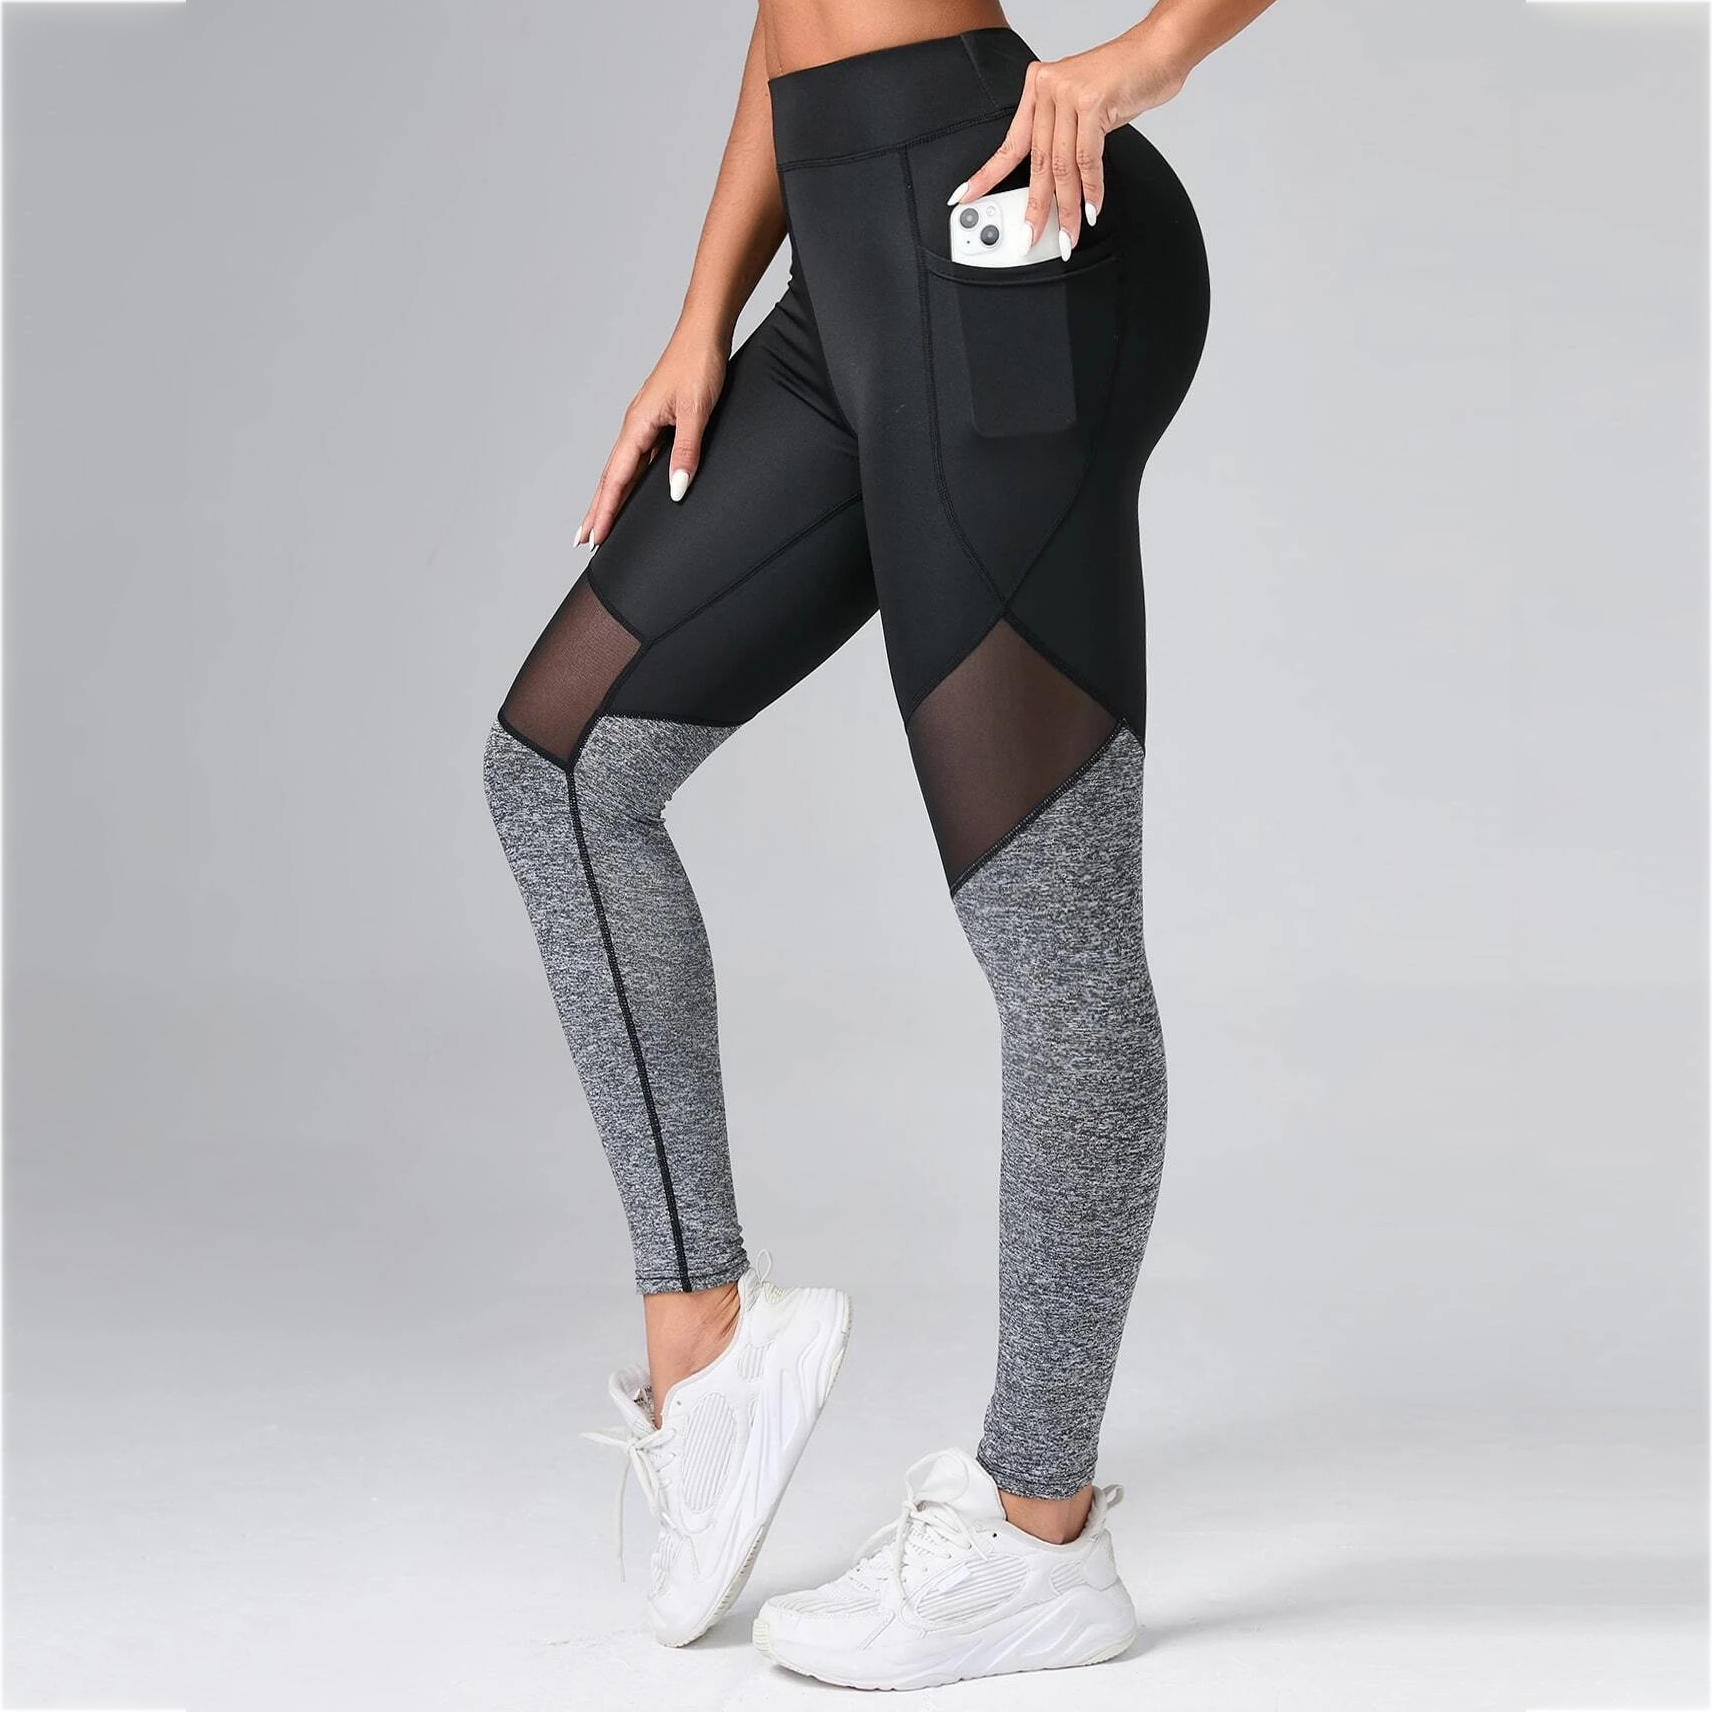 Contrast Color Panel Yoga Leggings Mesh Insert Gym Tights With Phone Pocket - S